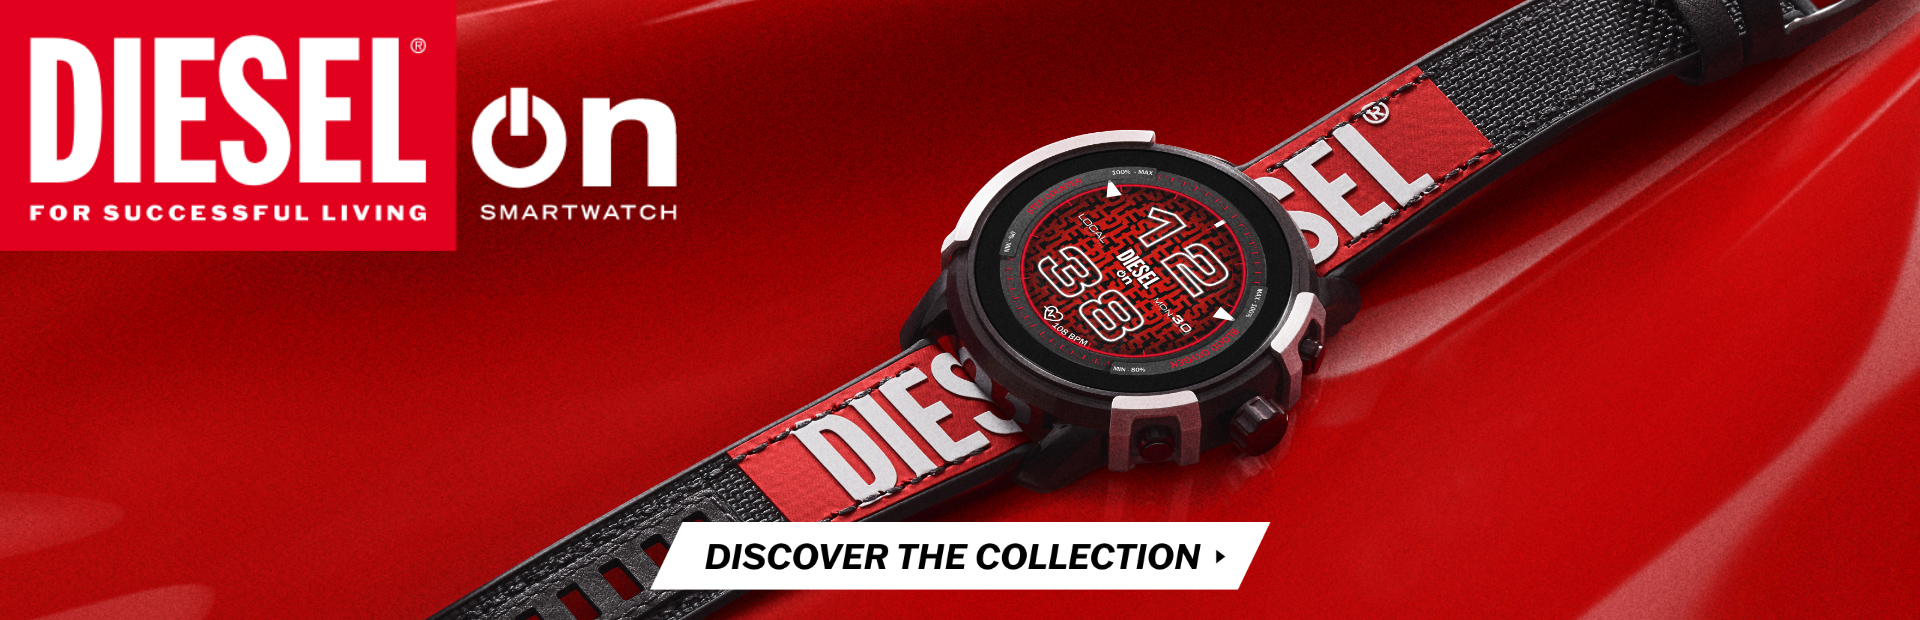 Discover the collection - Diesel